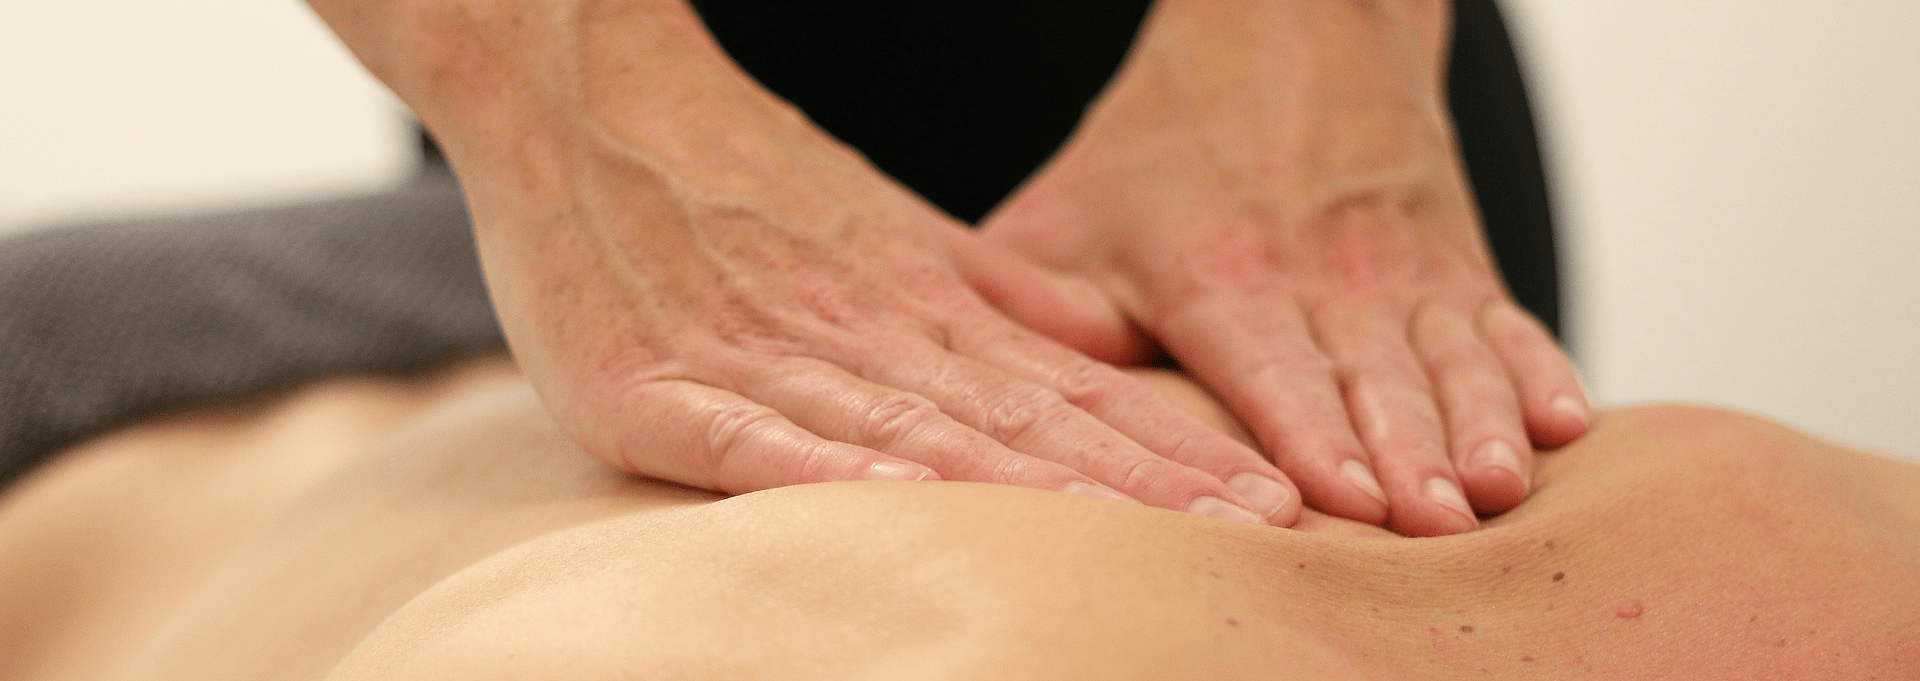 25 Reasons for Massage